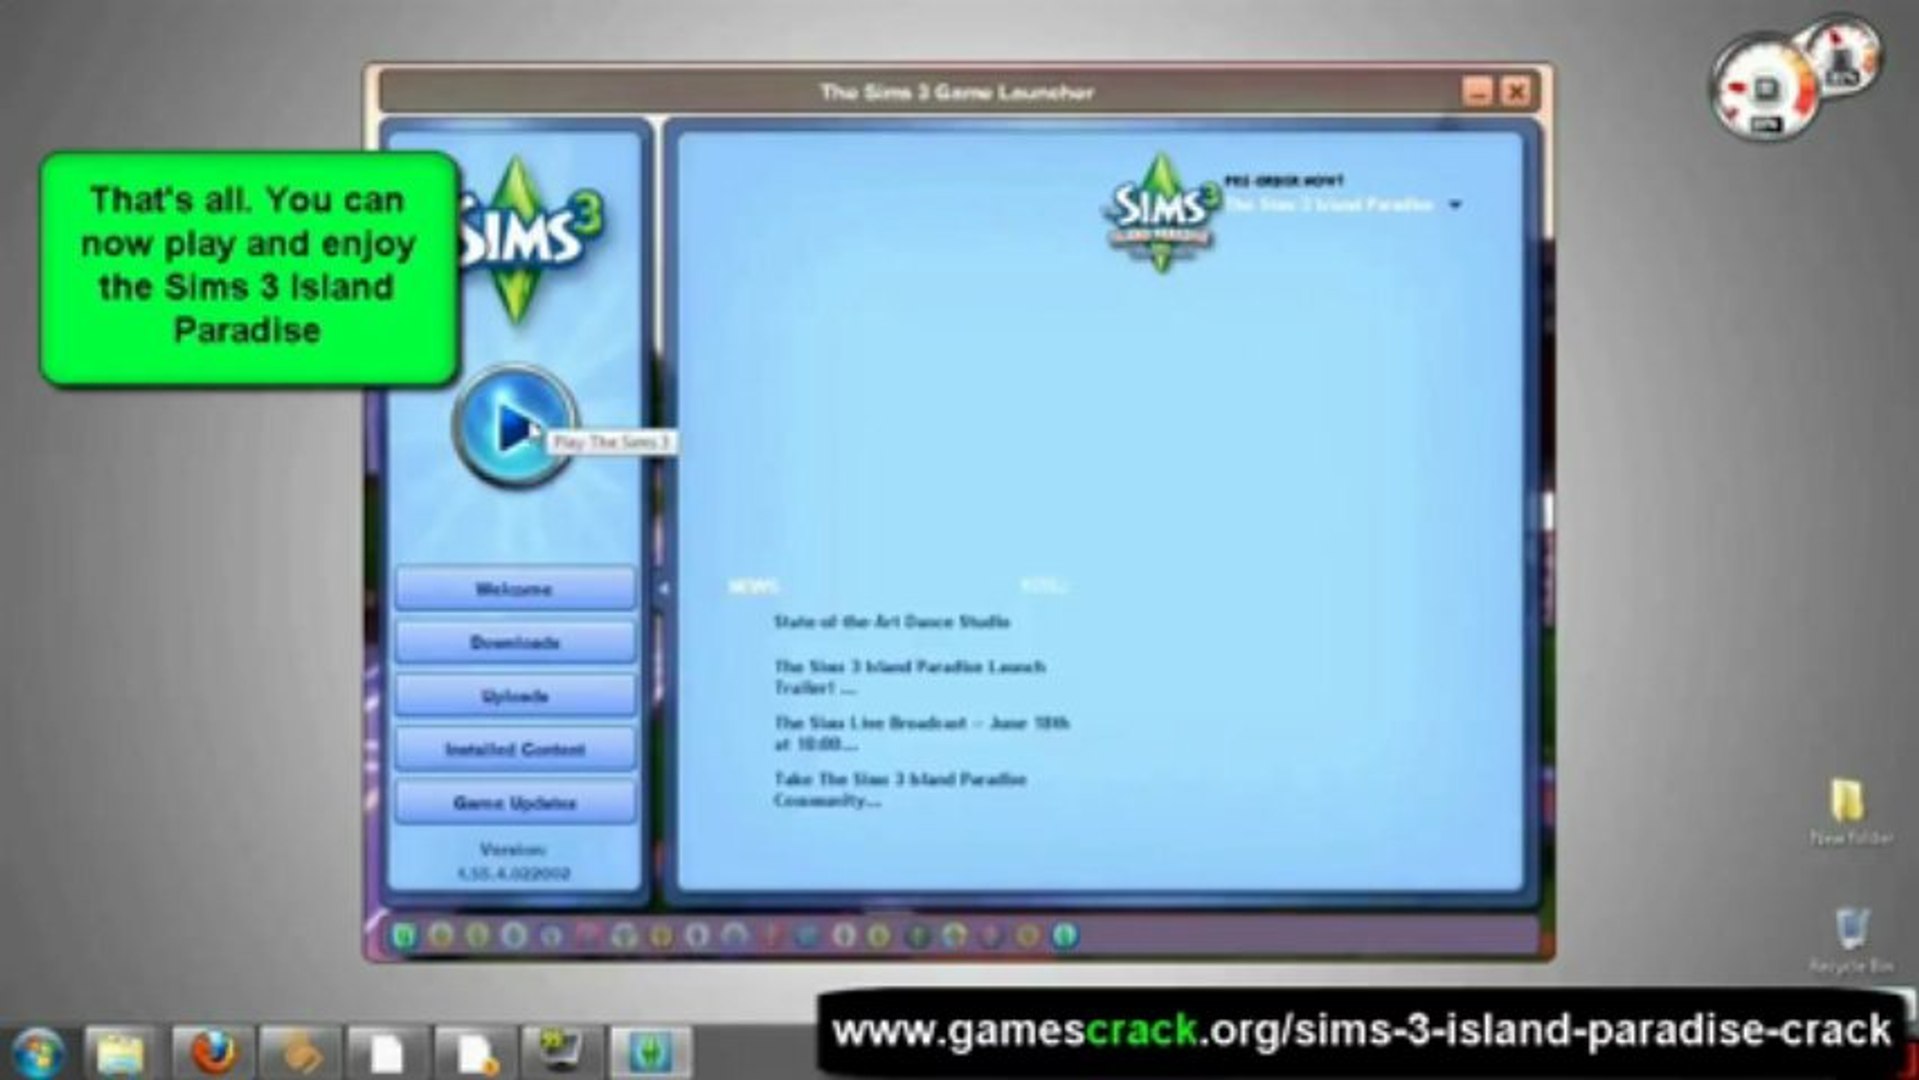 3 Ways to Play Sims 3 Without the CD - wikiHow